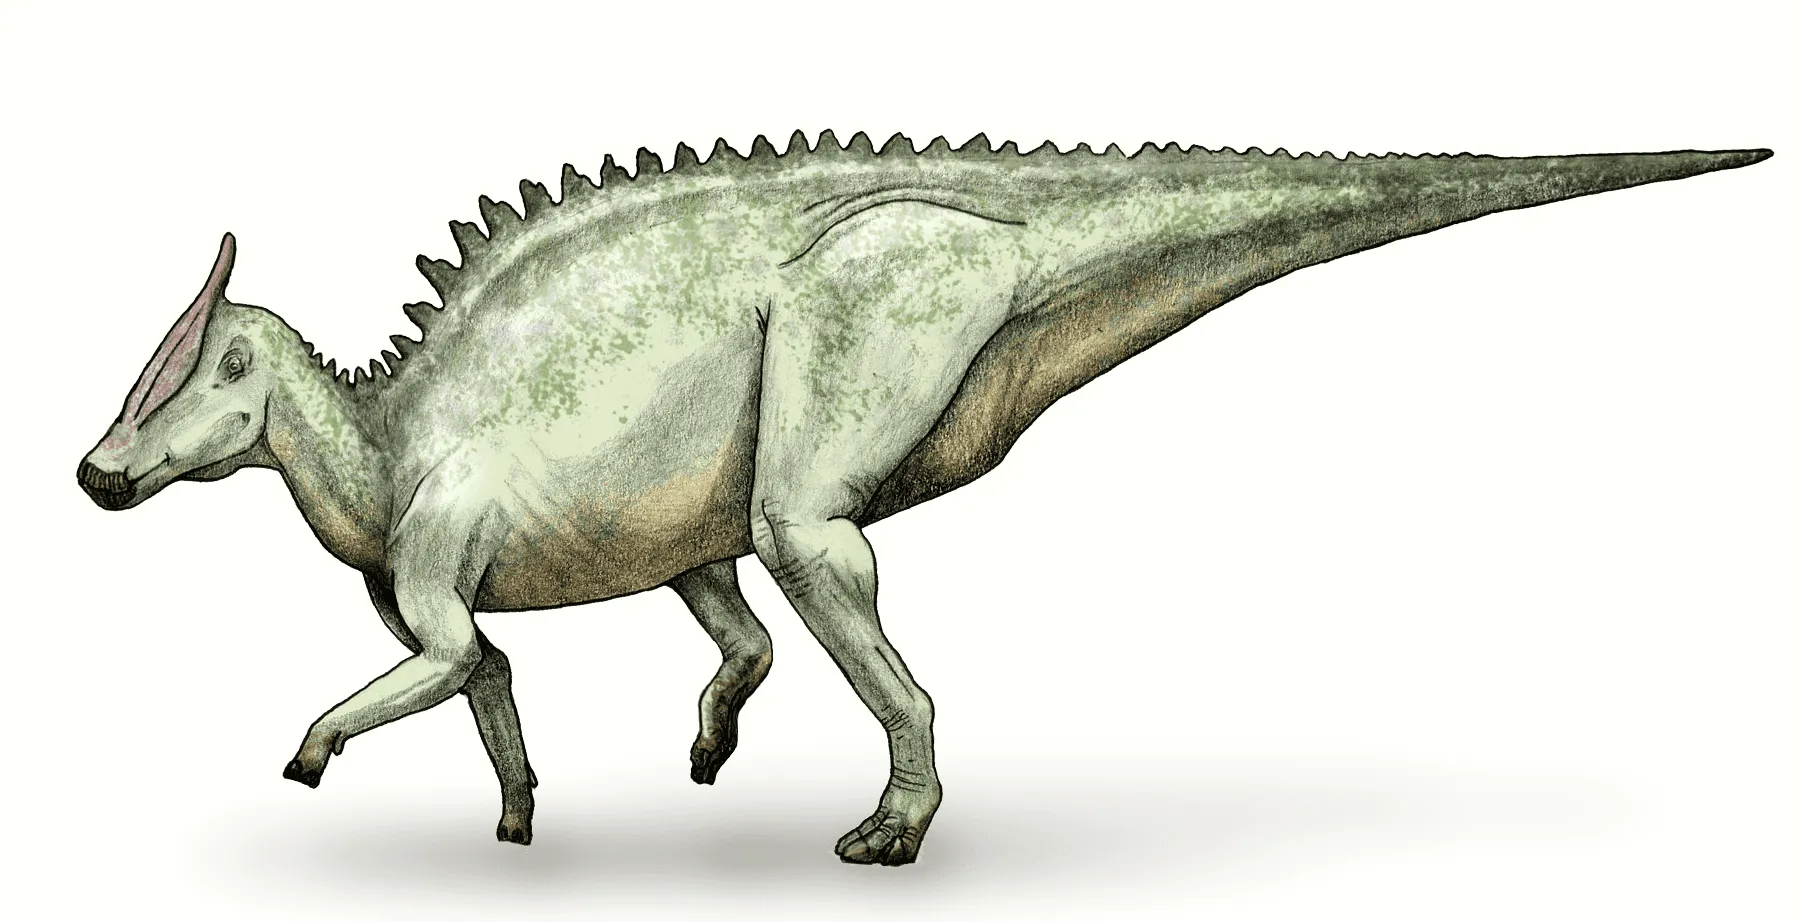 The Saurolophus was a duck-billed dinosaur that could move on both two and four limbs and had a head that resembled a deer but with a spike. Continue reading to discover more interesting Saurolophus facts that you're to enjoy!